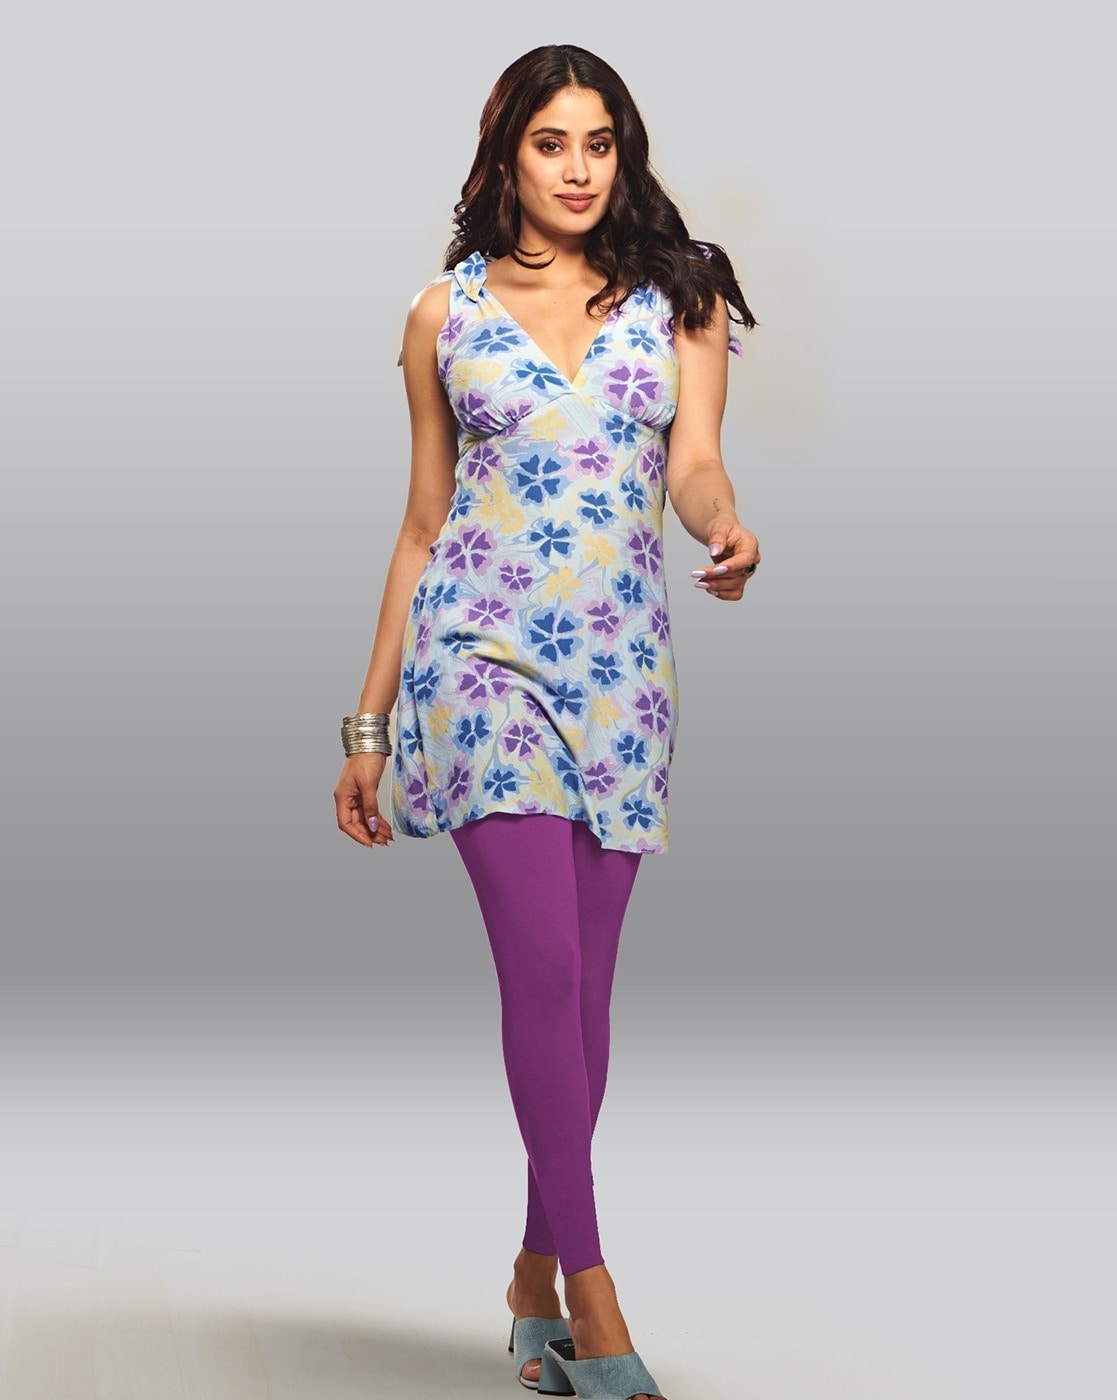 Buy LYRA Legging (Purple, Dark Blue, Solid)-Lyra_IC_03_67_FS_2PC Online In  India At Discounted Prices